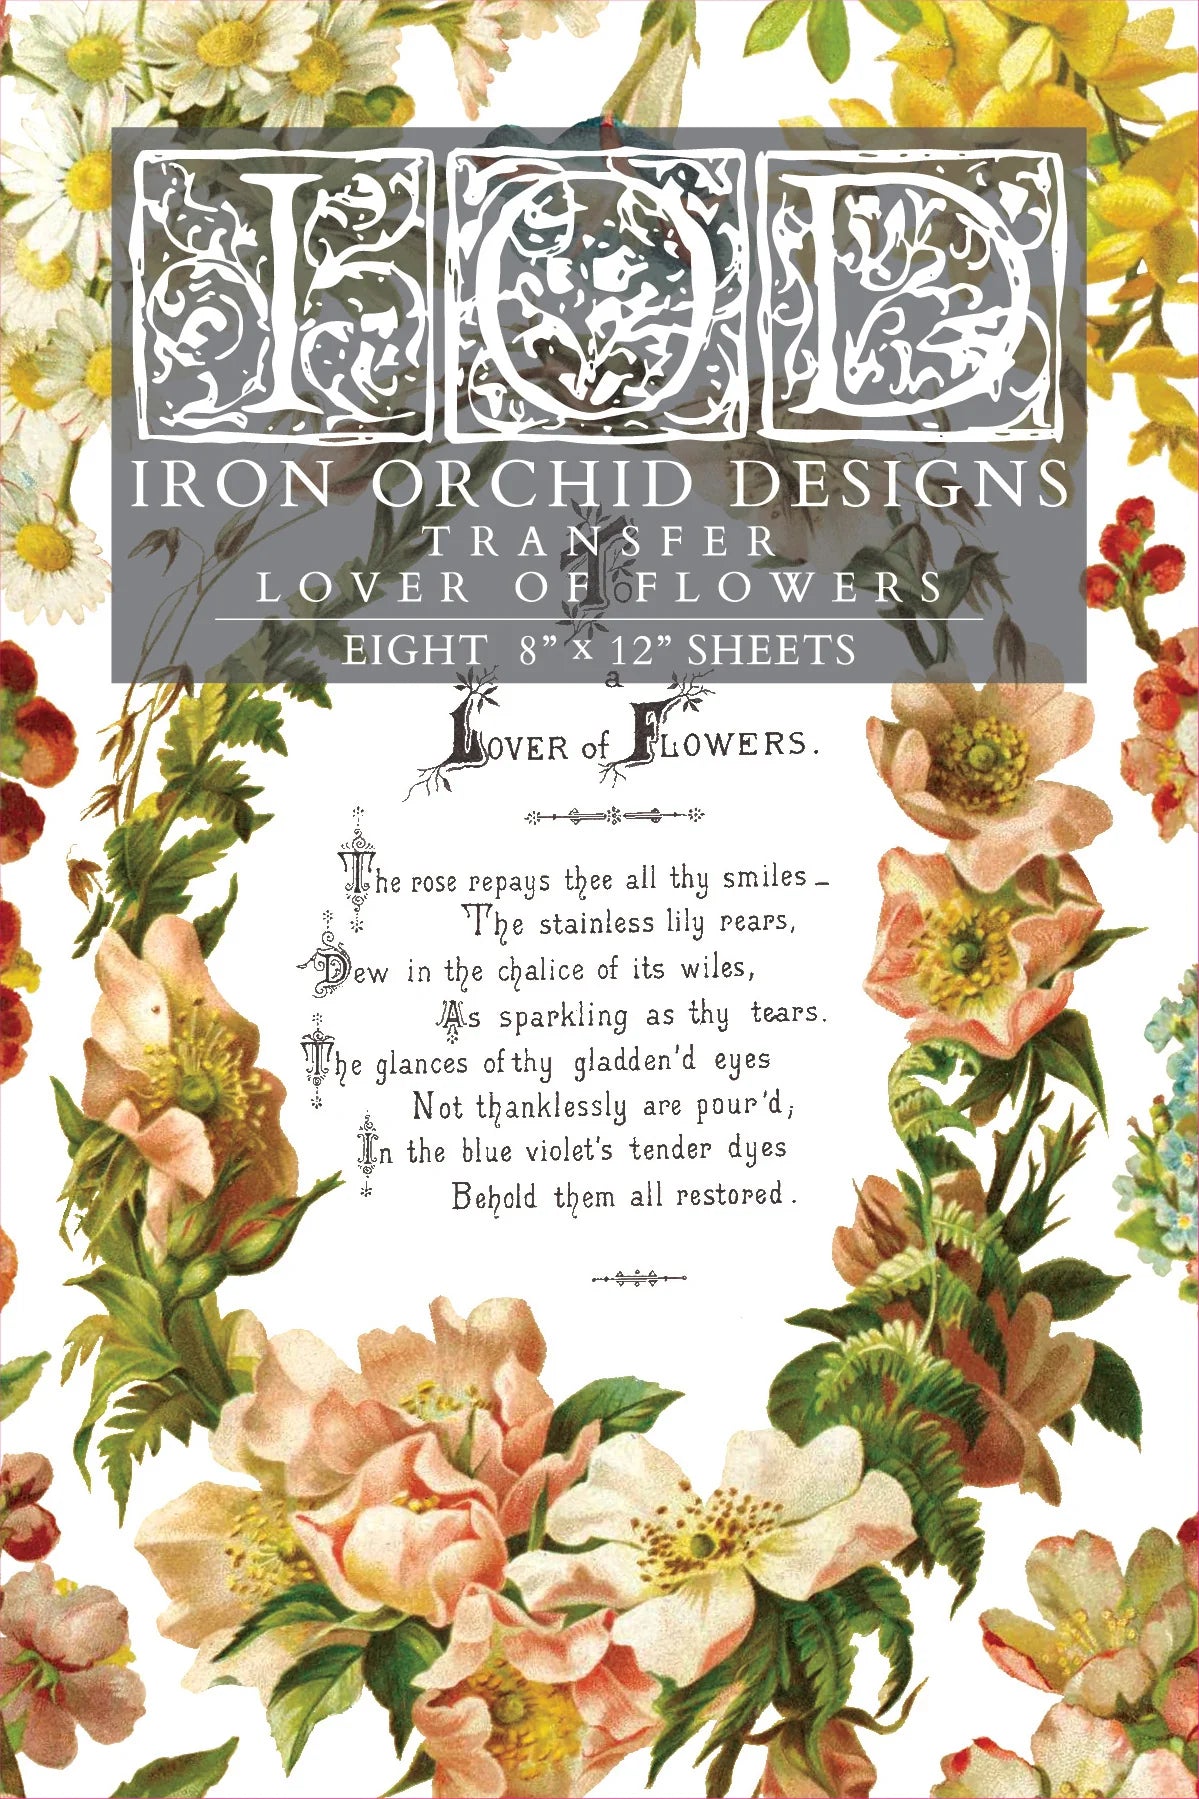 Lover of Flowers Transfer by Iron Orchid Designs IOD PRE-ORDER